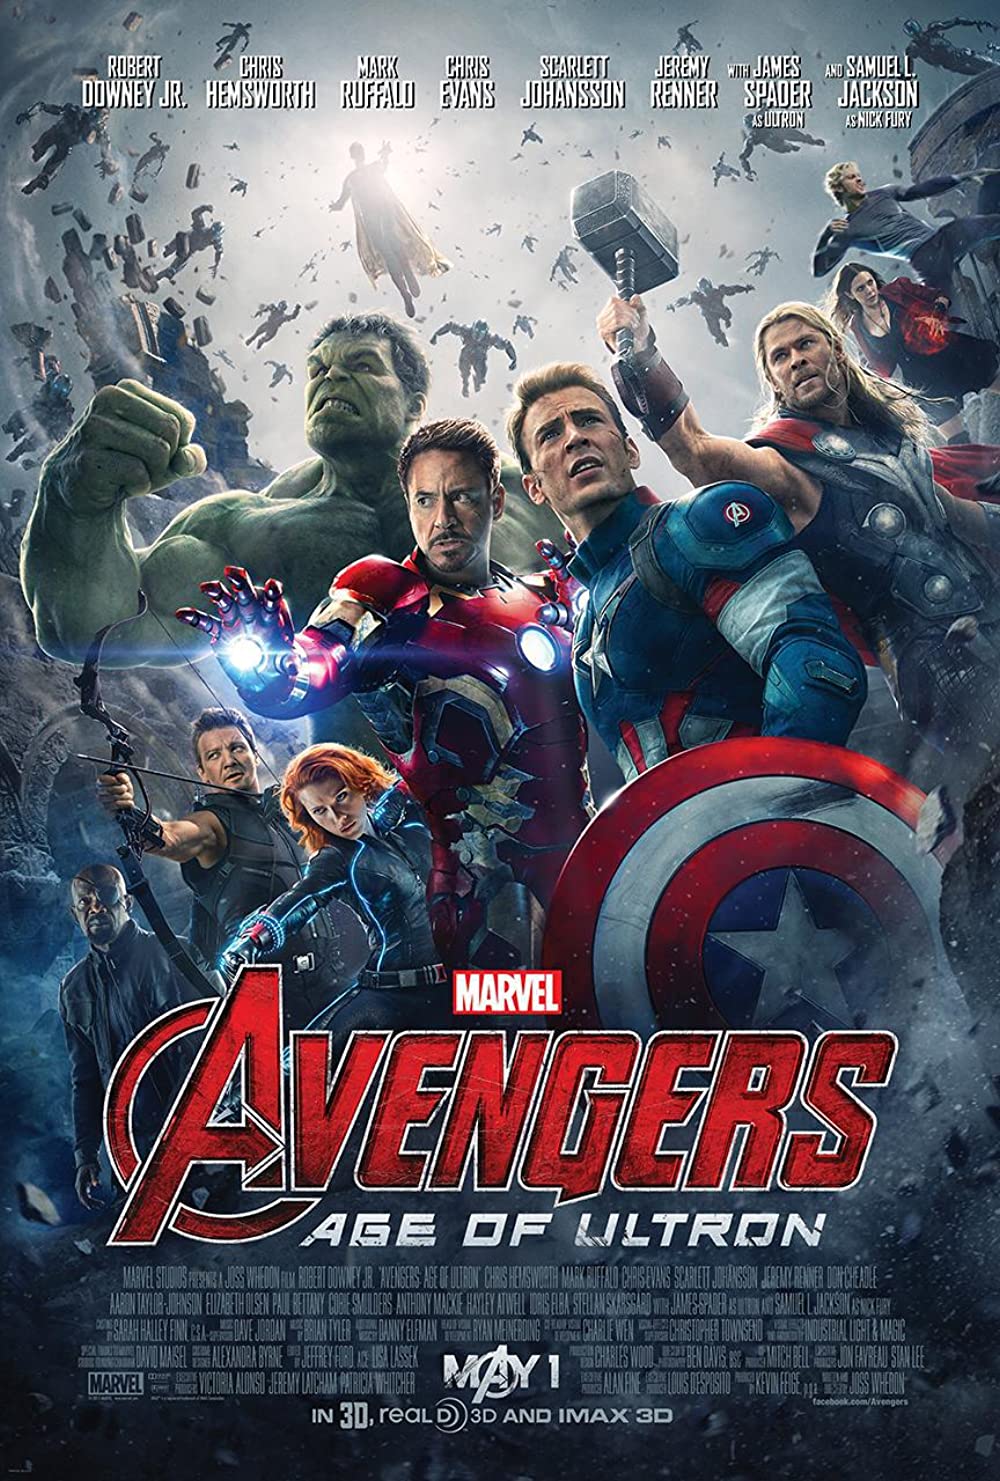 Ingvild plays a supporting role in ‘AVENGERS: AGE OF ULTRON’